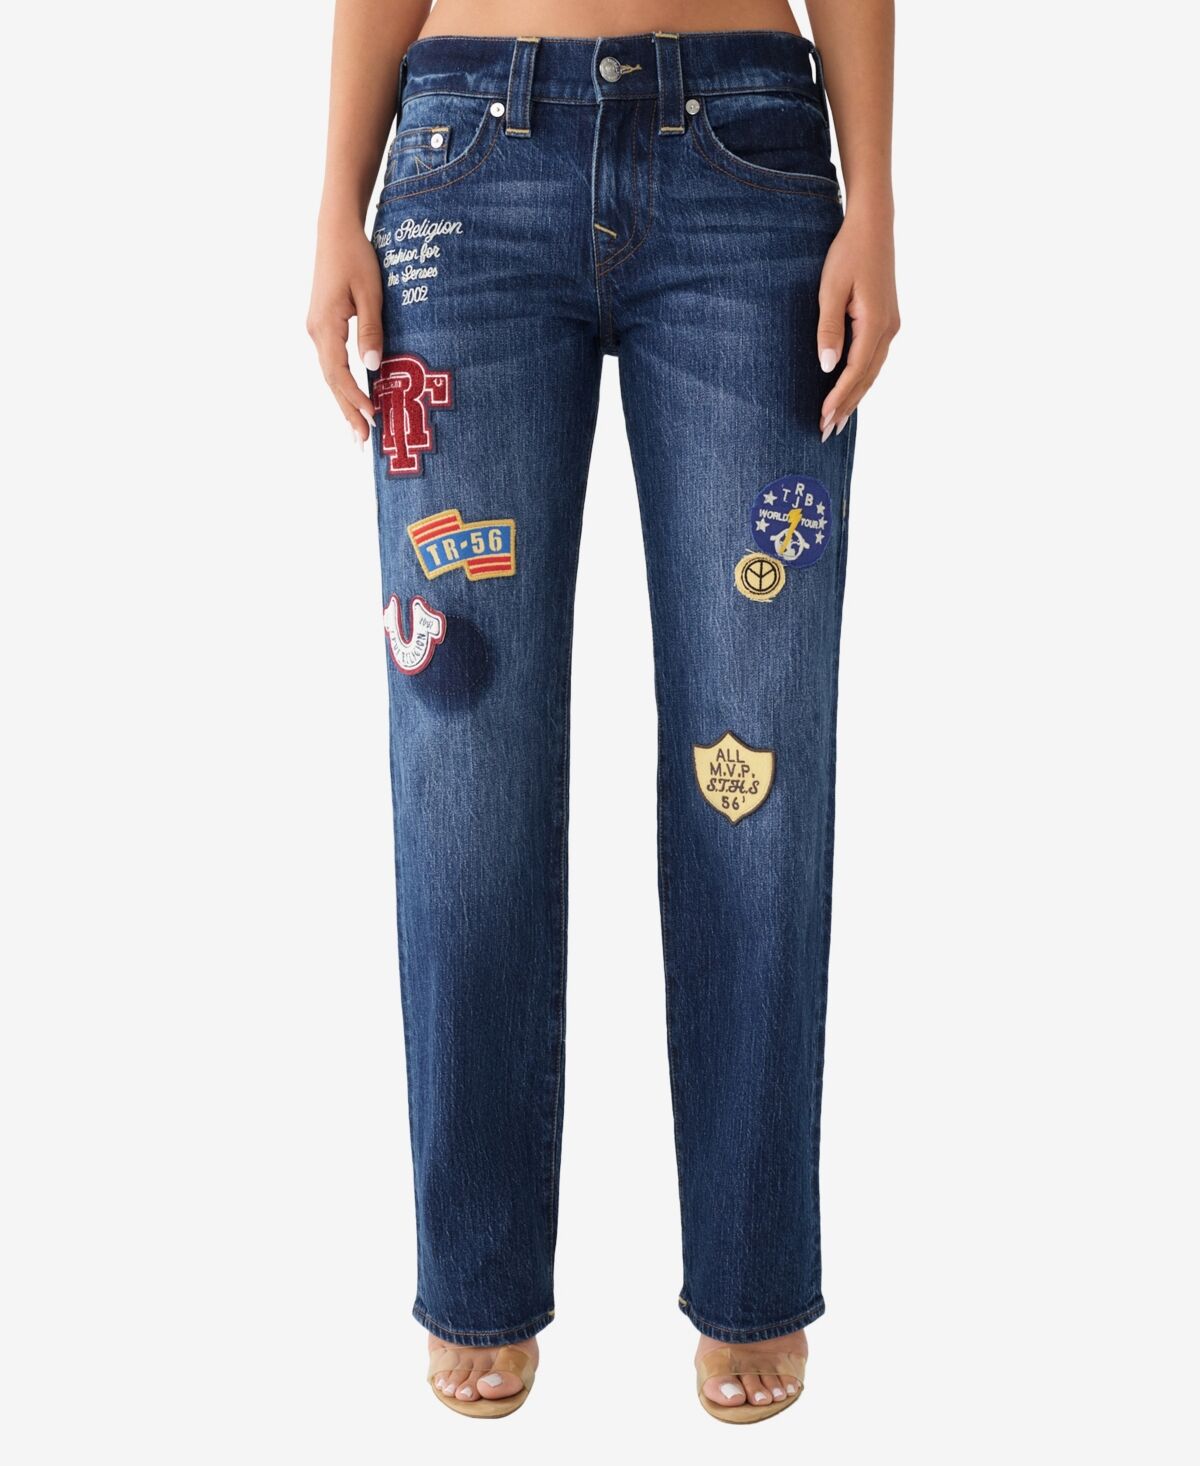 True Religion Women's Ricki Straight Jeans with Patches - Crystal Cove